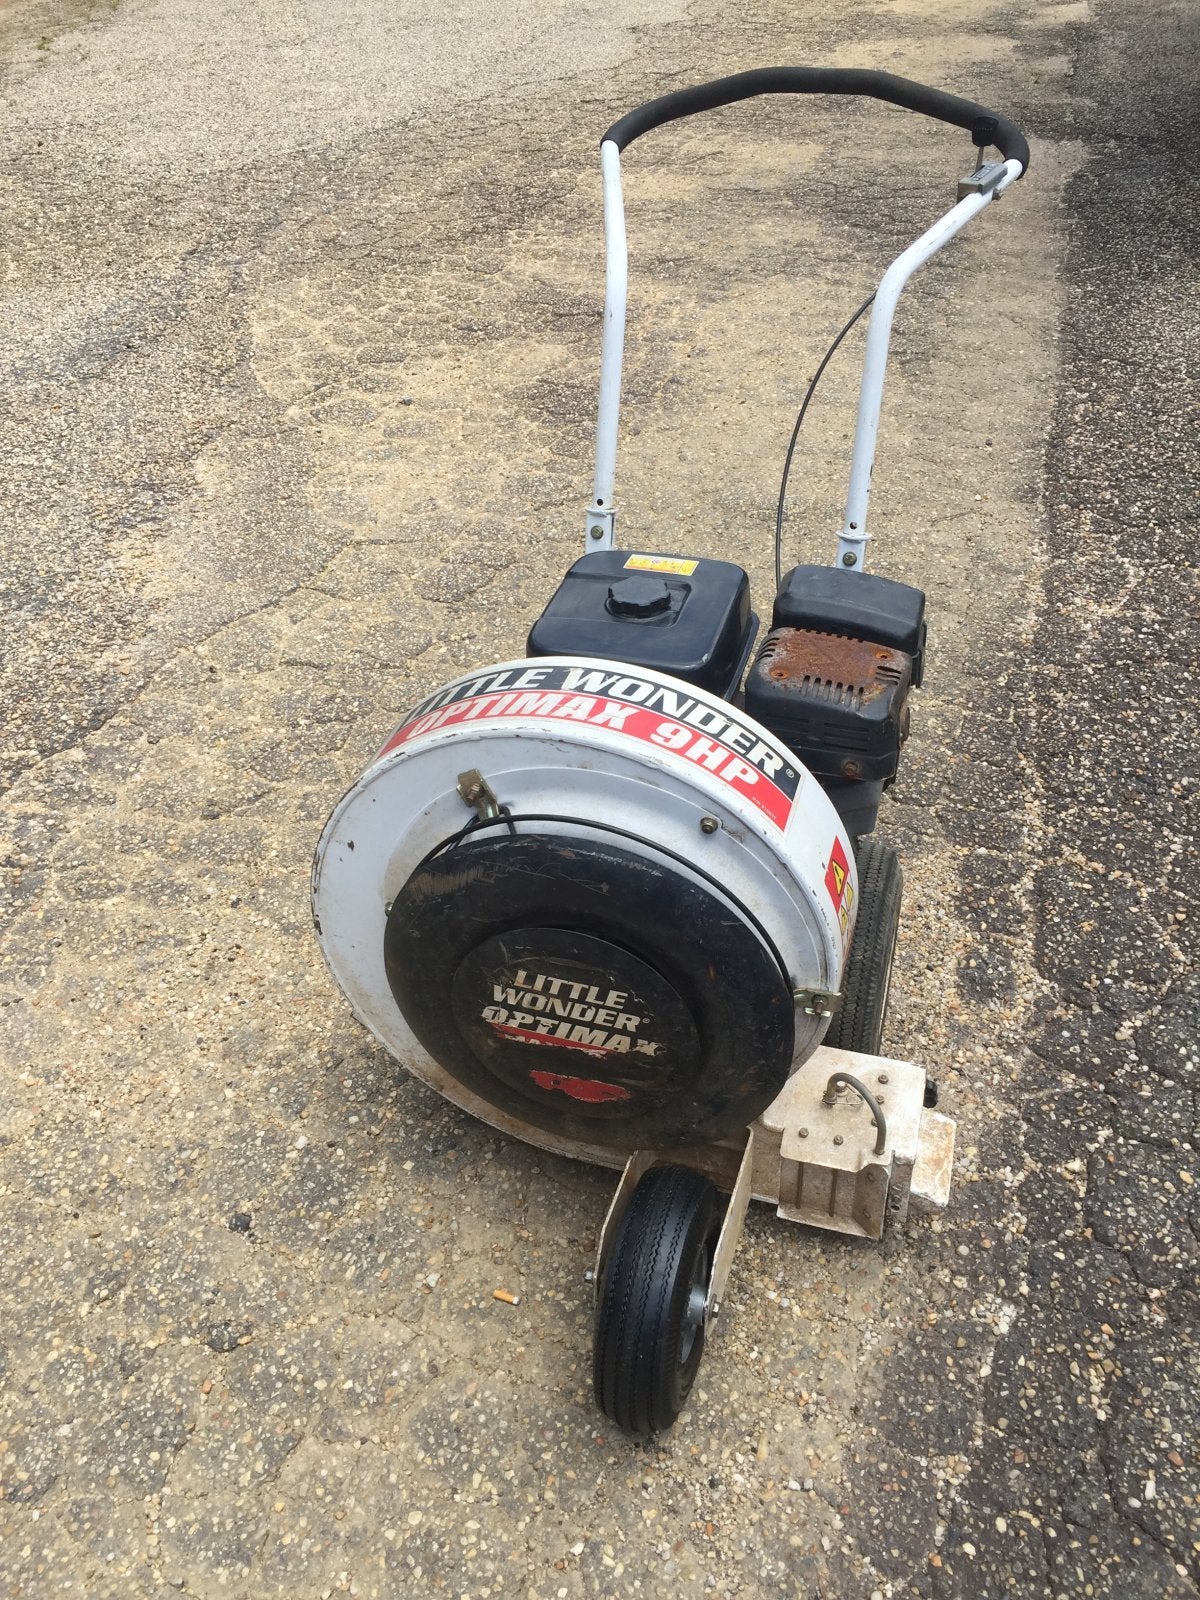 Little Wonder 9HP Blower $400 | LawnSite™ is the largest and most